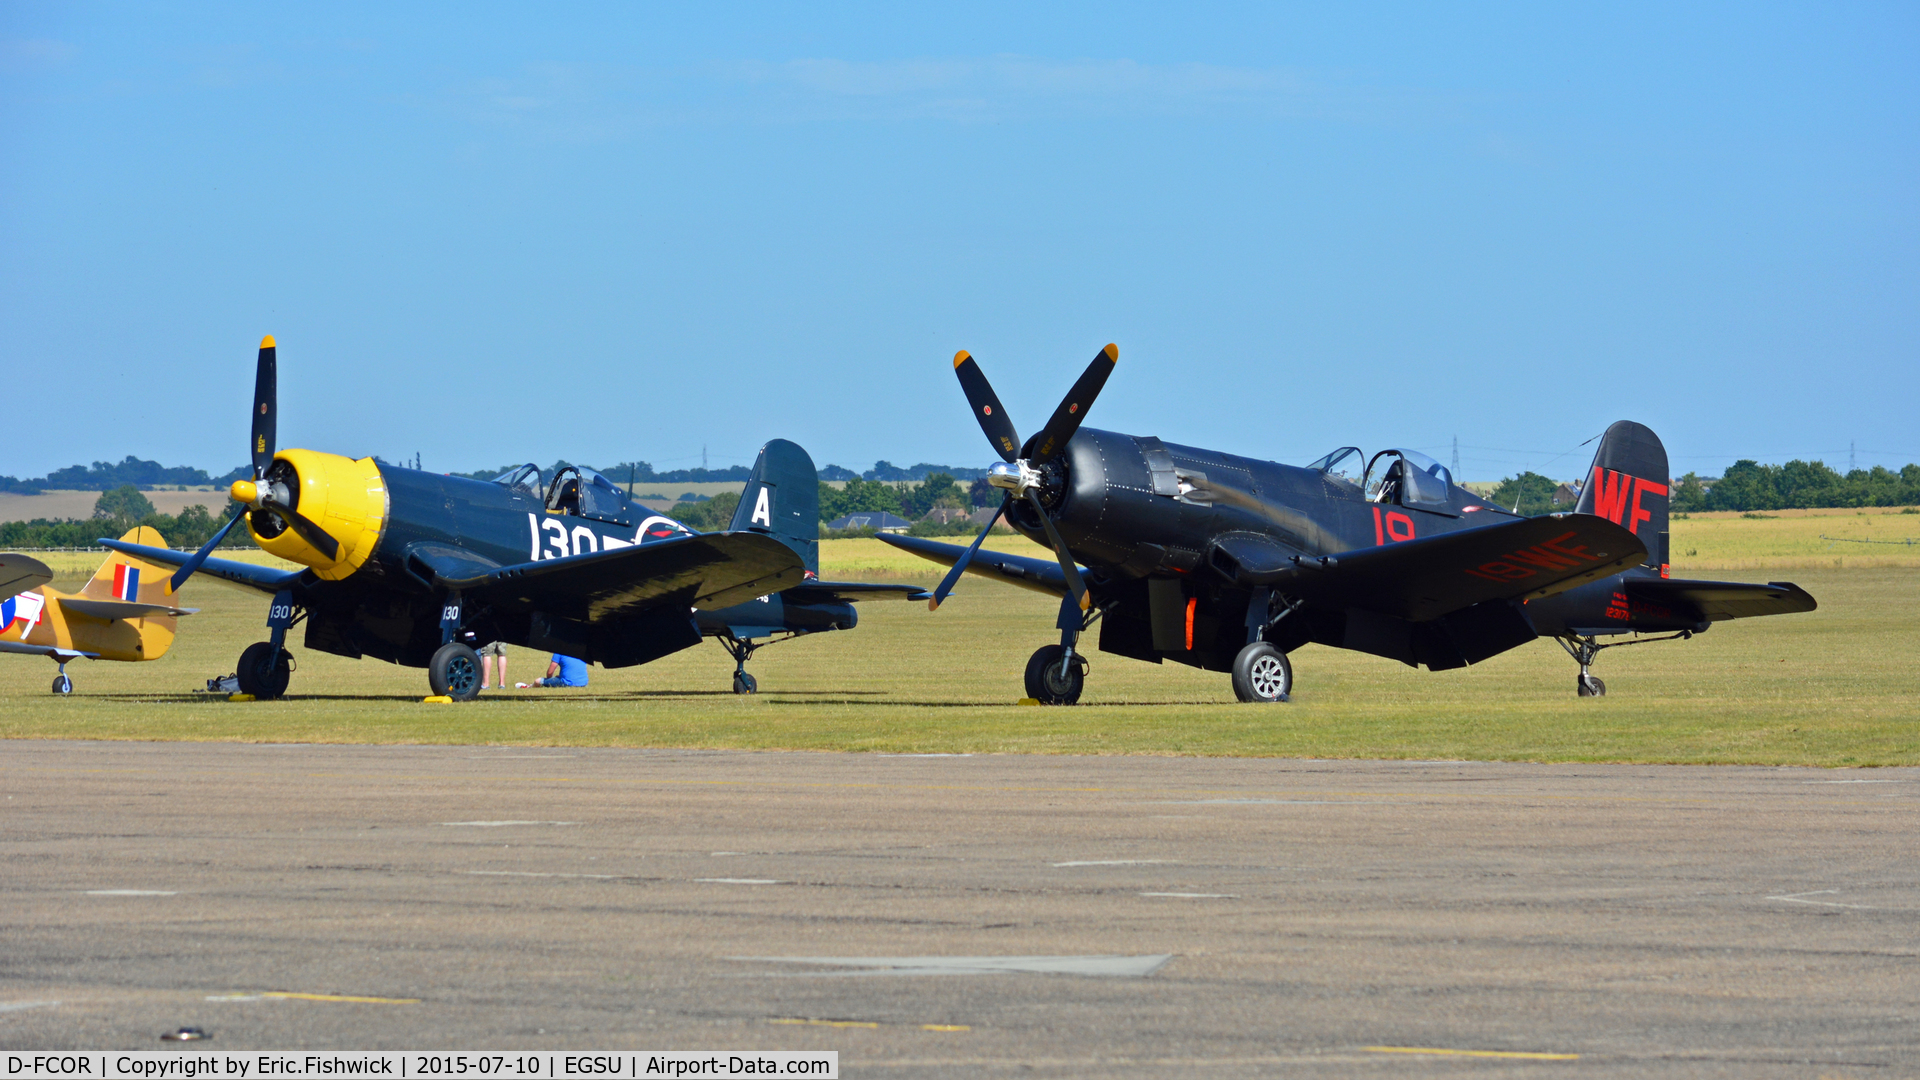 D-FCOR, 1950 Vought F4U-5NL Corsair C/N 124541, 5. D-FCOR - A pair of Corsairs ready for The Flying Legends Air Show, July 2015.